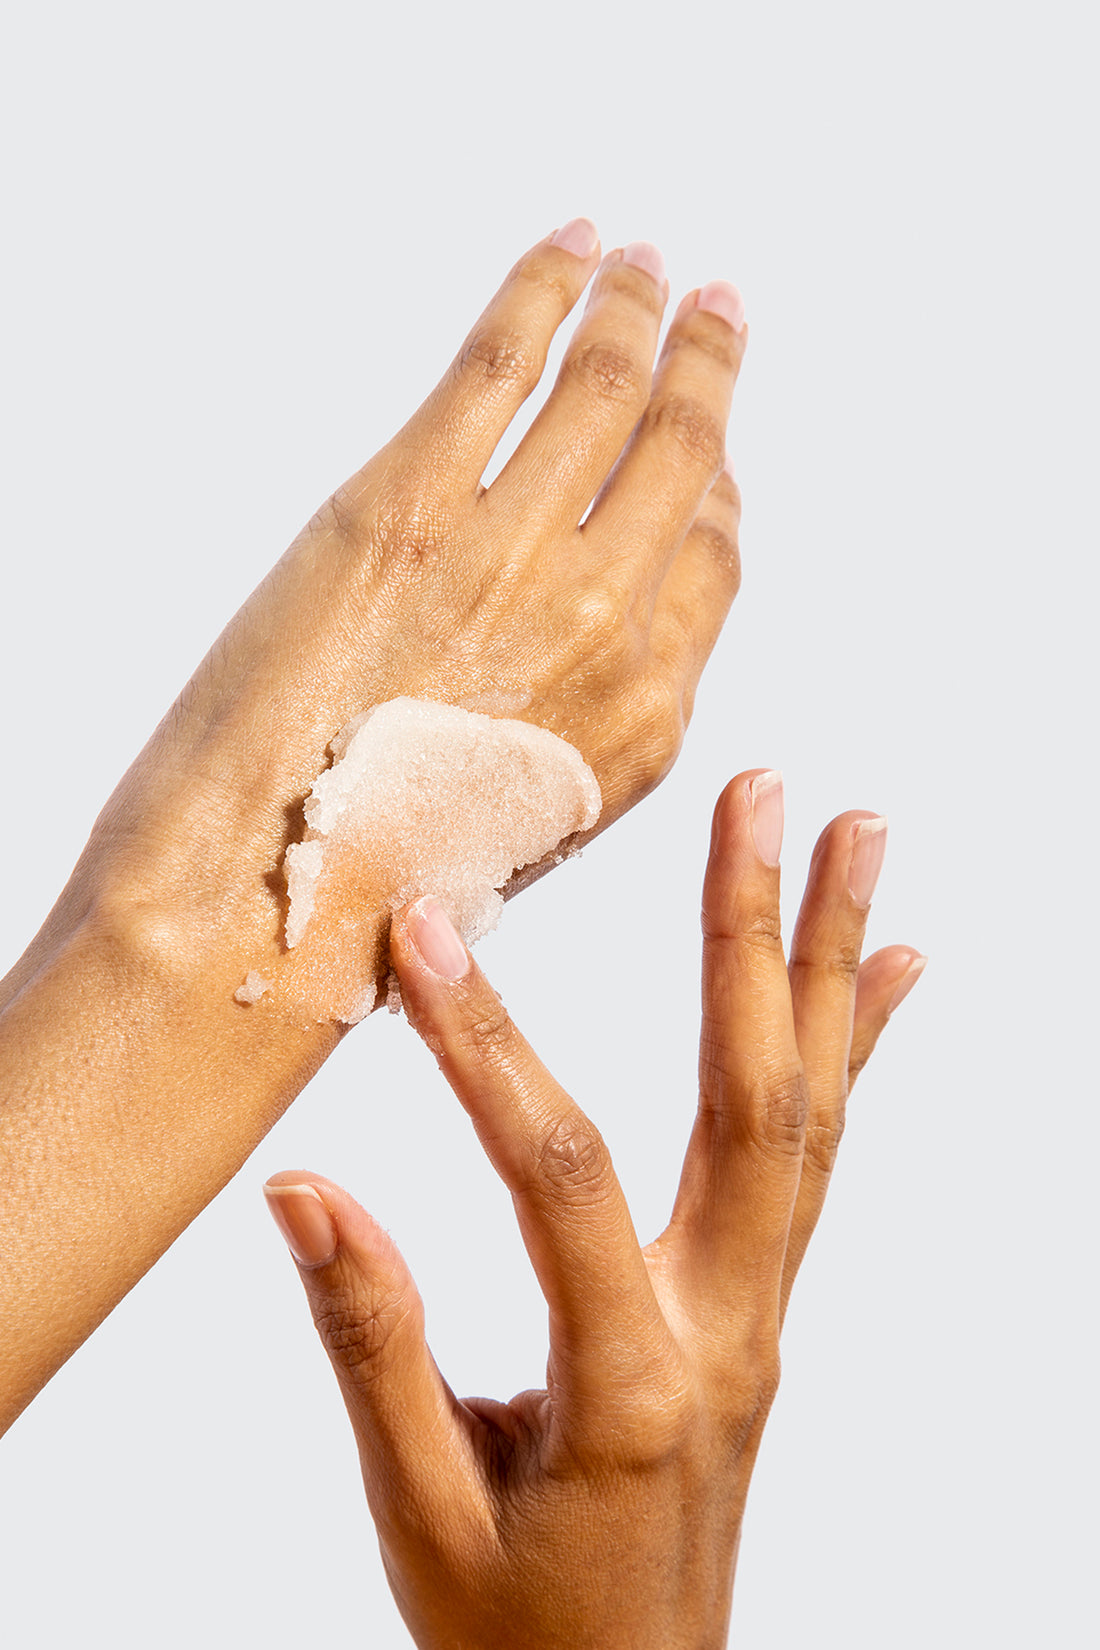 a pair of hands apply scrub to top of one hand